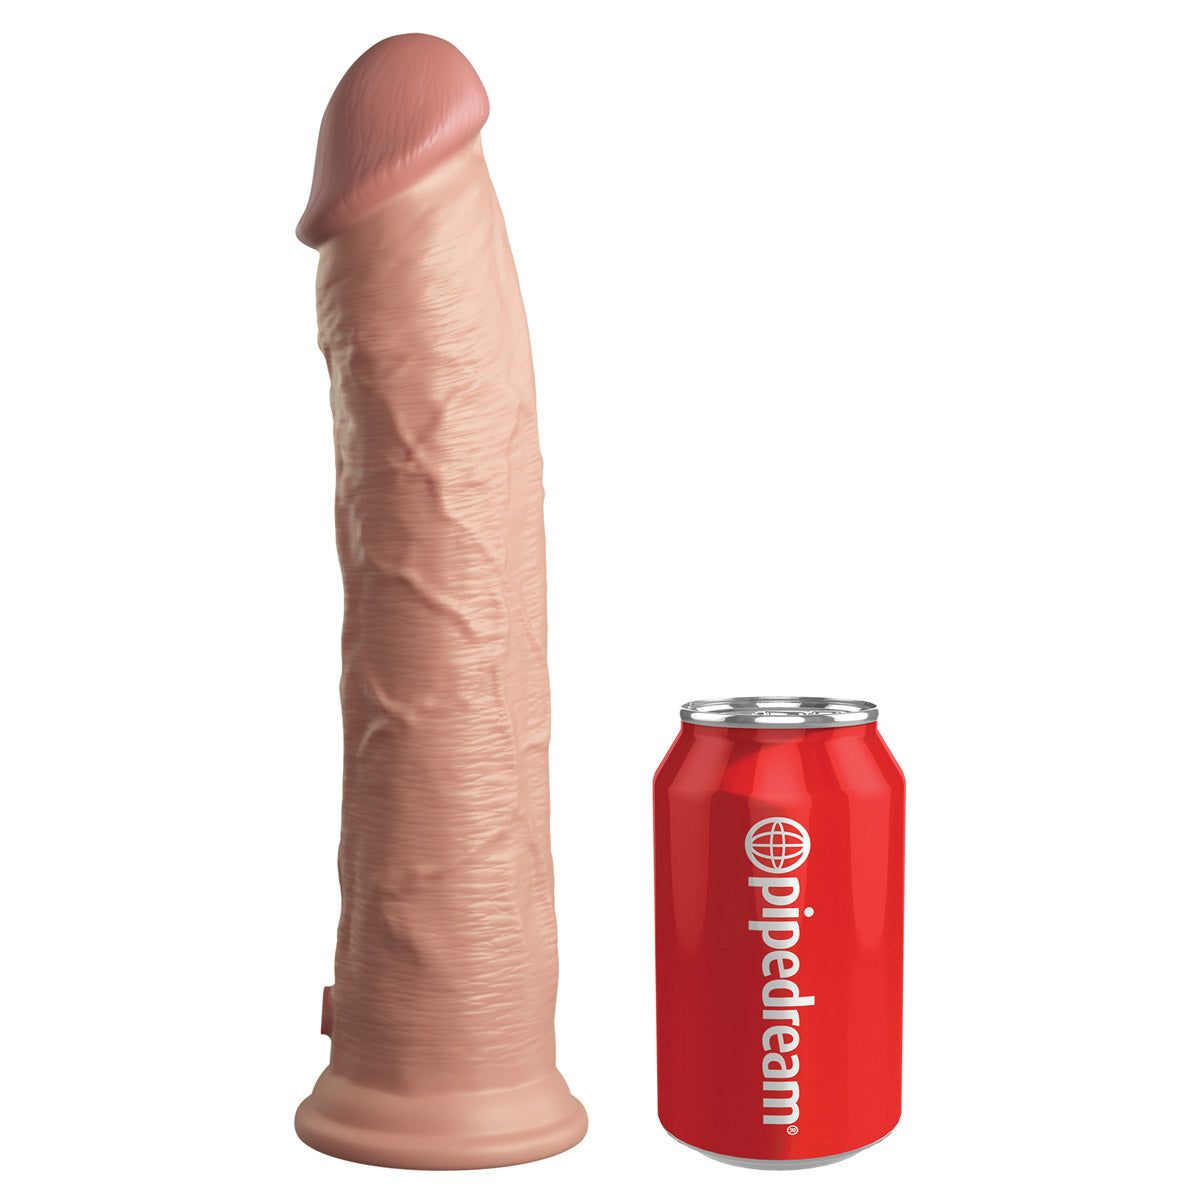 King Cock Elite 11" Silicone Dual Density Cock - Light - Thorn & Feather Sex Toy Canada